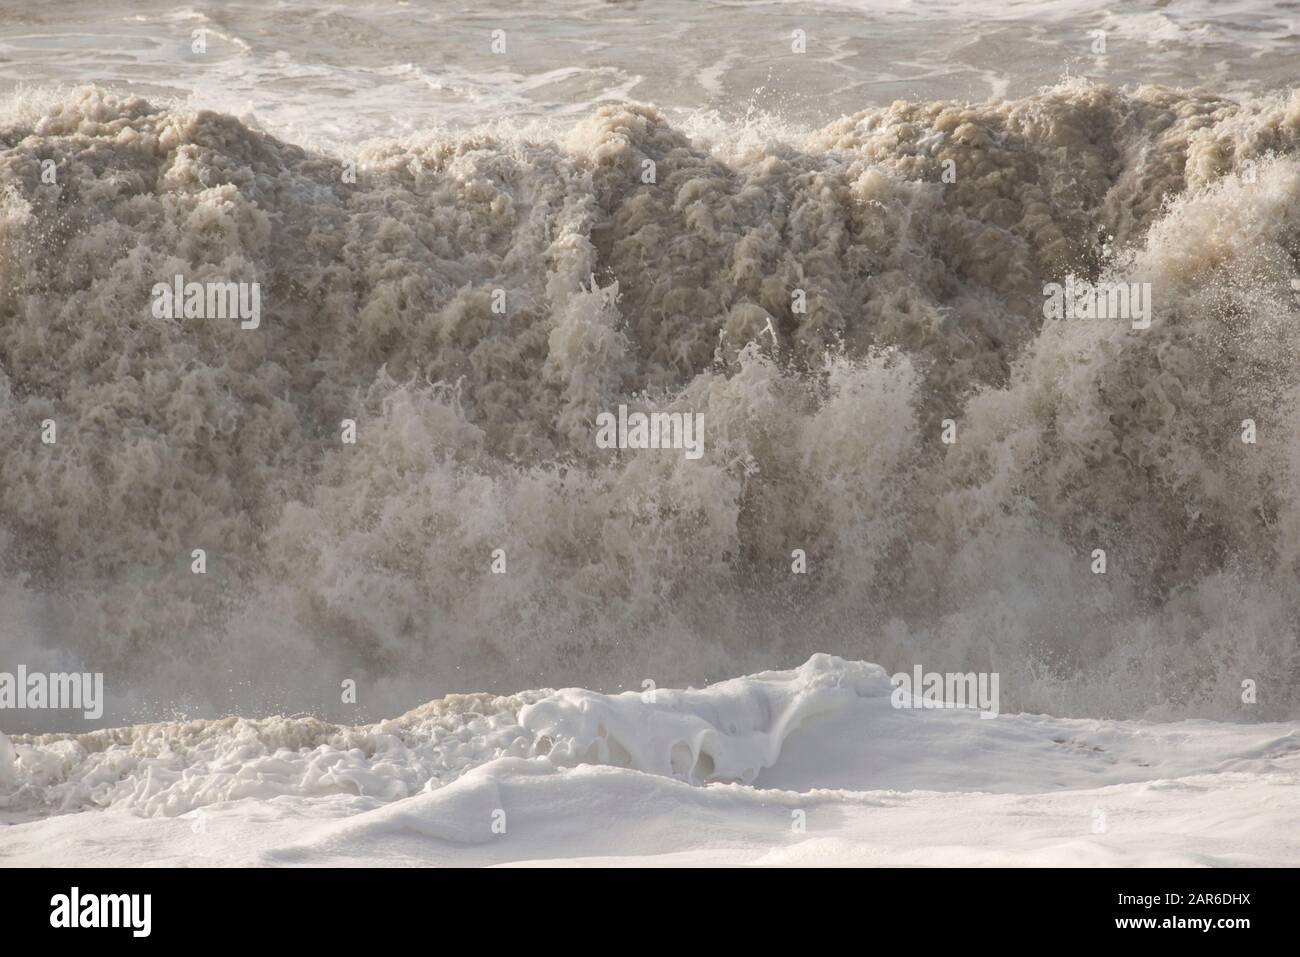 High waves, breakers from a Channel storm with whipped up beach sand eroding the coastline on Hive Beach, Dorset, January Stock Photo